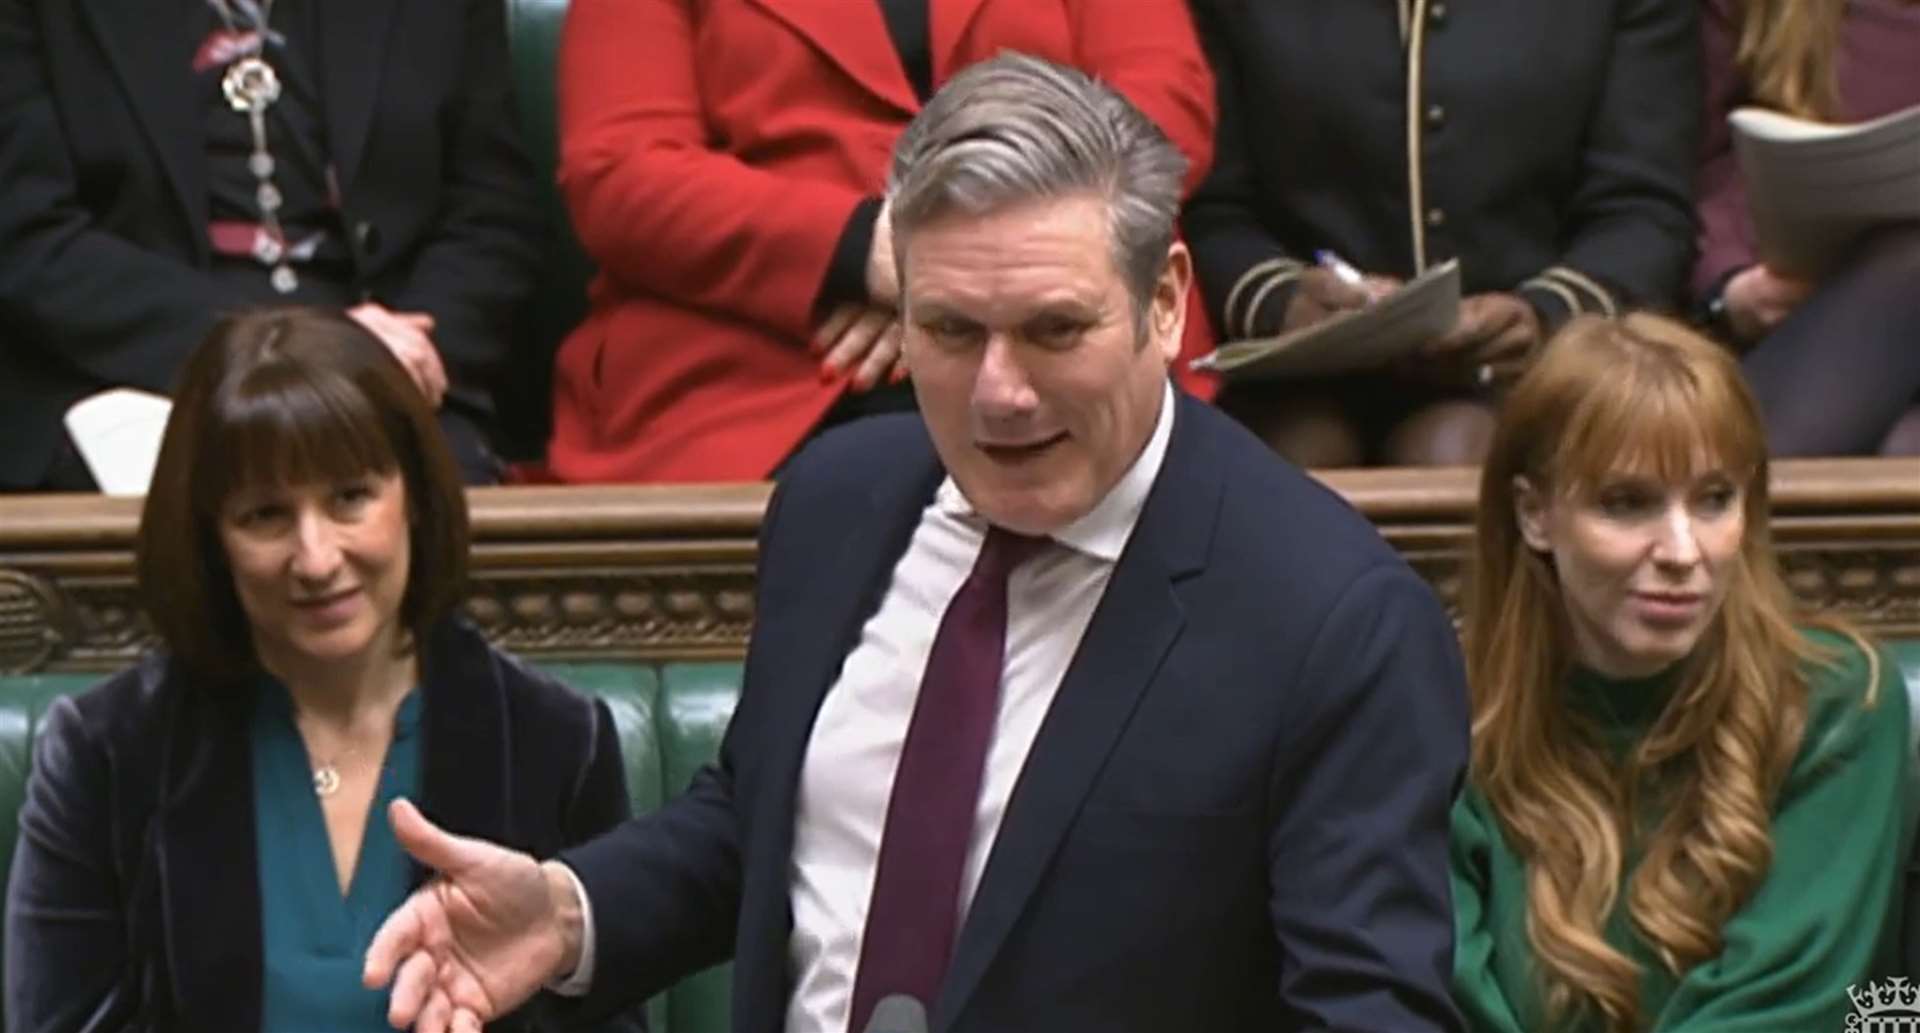 Labour leader Sir Keir Starmer challenges Rishi Sunak during Prime Minister’s Questions (House of Commons/PA)